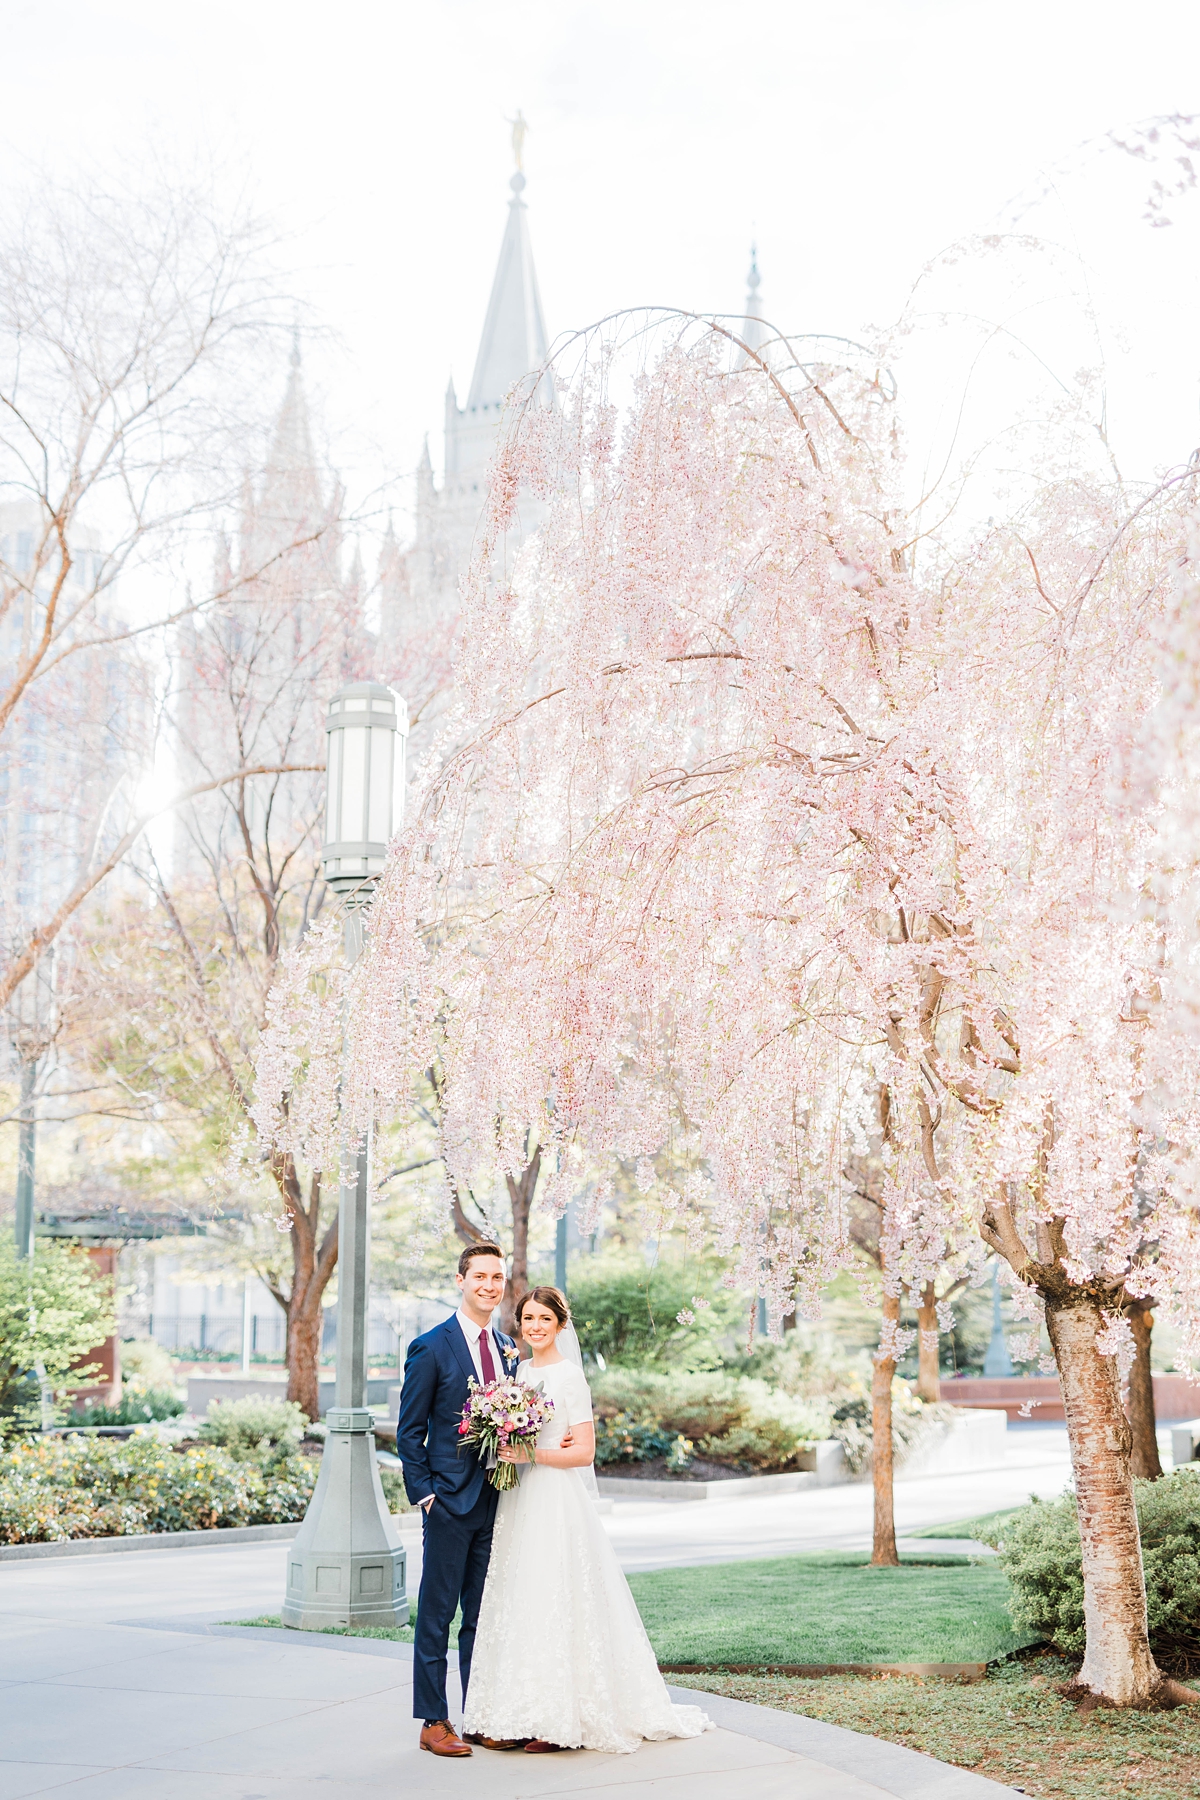 Spring wedding with cherry blossoms at the Salt Lake LDS Temple, modest lace wedding dress, purple flowers, utah wedding photography